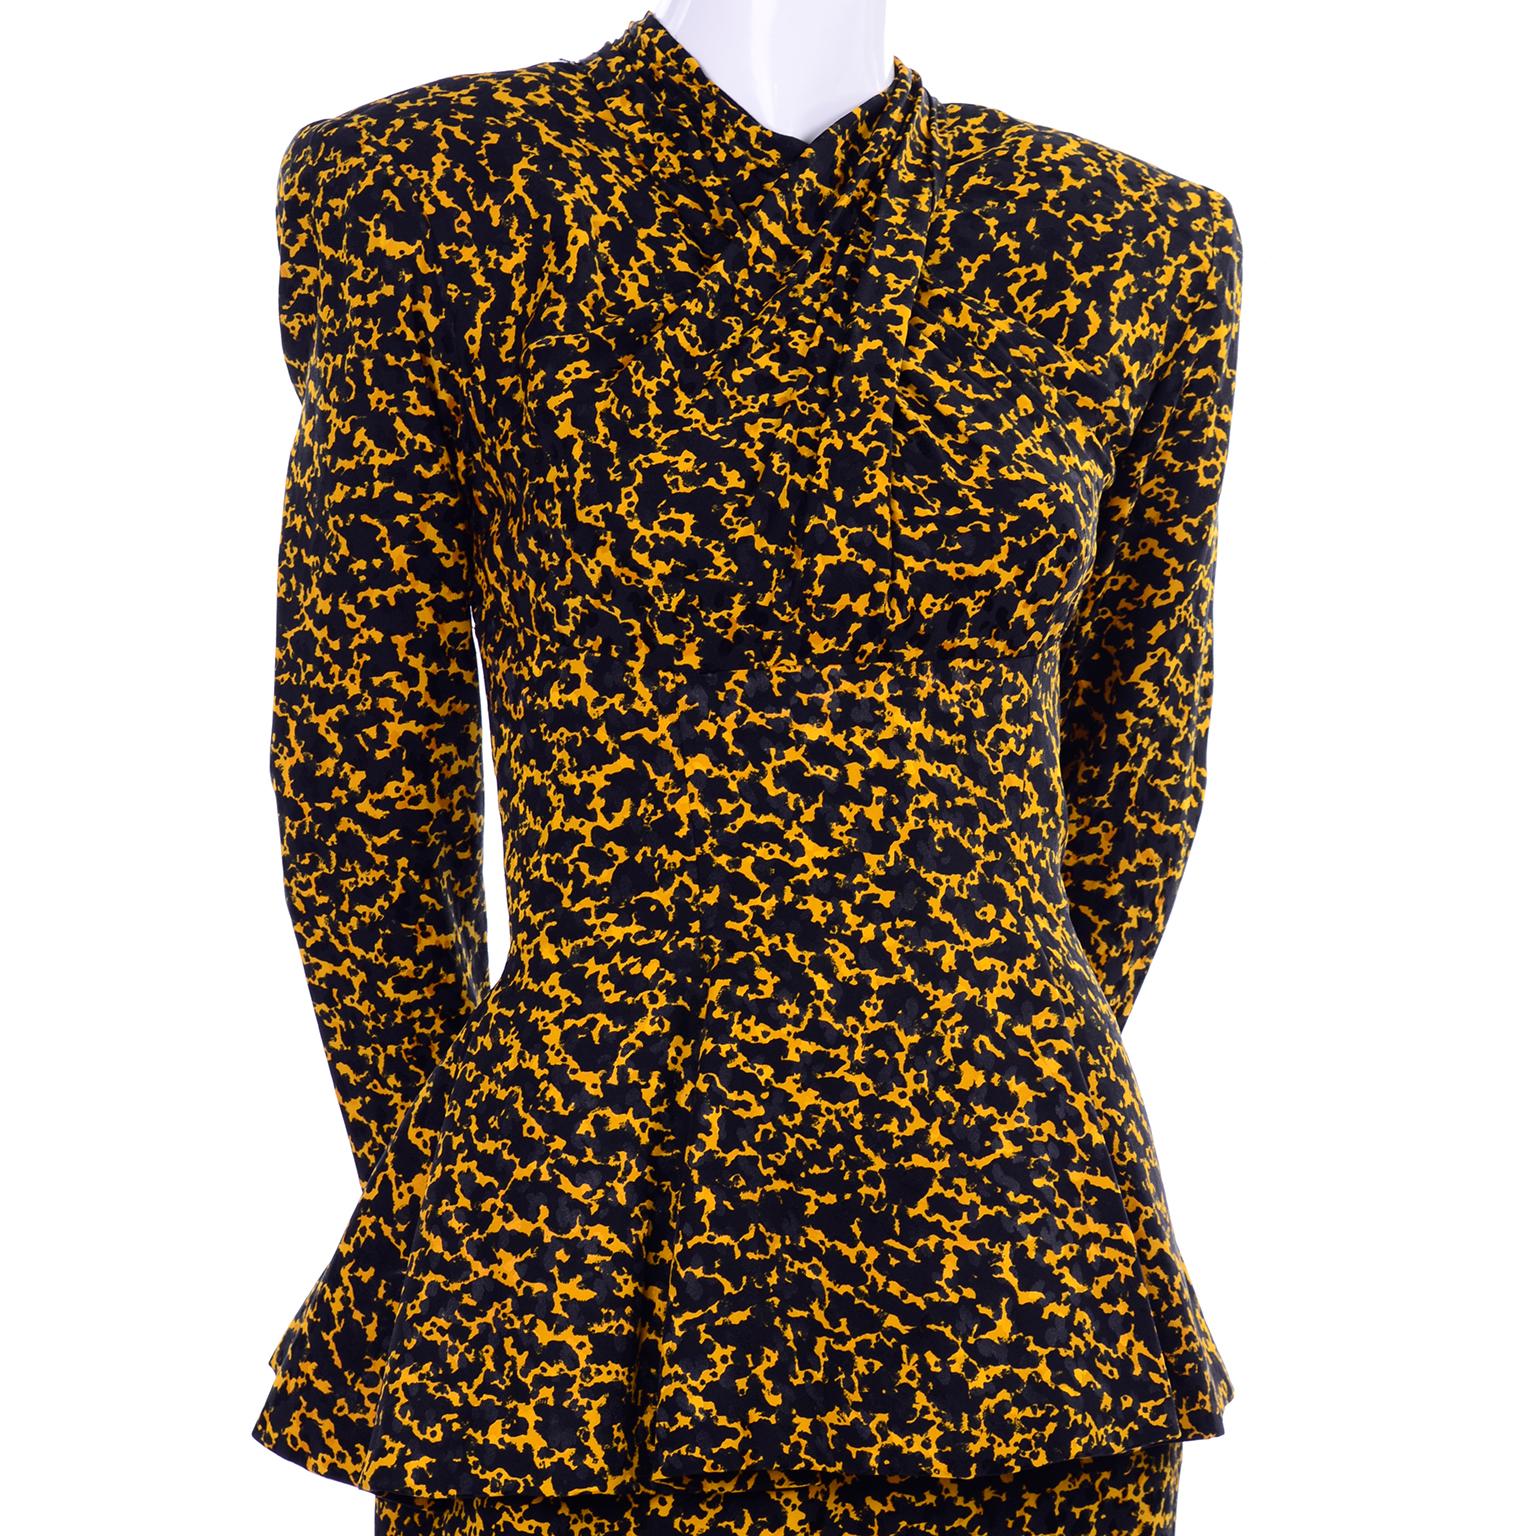 Women's Vicky Tiel Peplum Top & Skirt Dress / Suit in Yellow & Black Abstract Silk Print For Sale